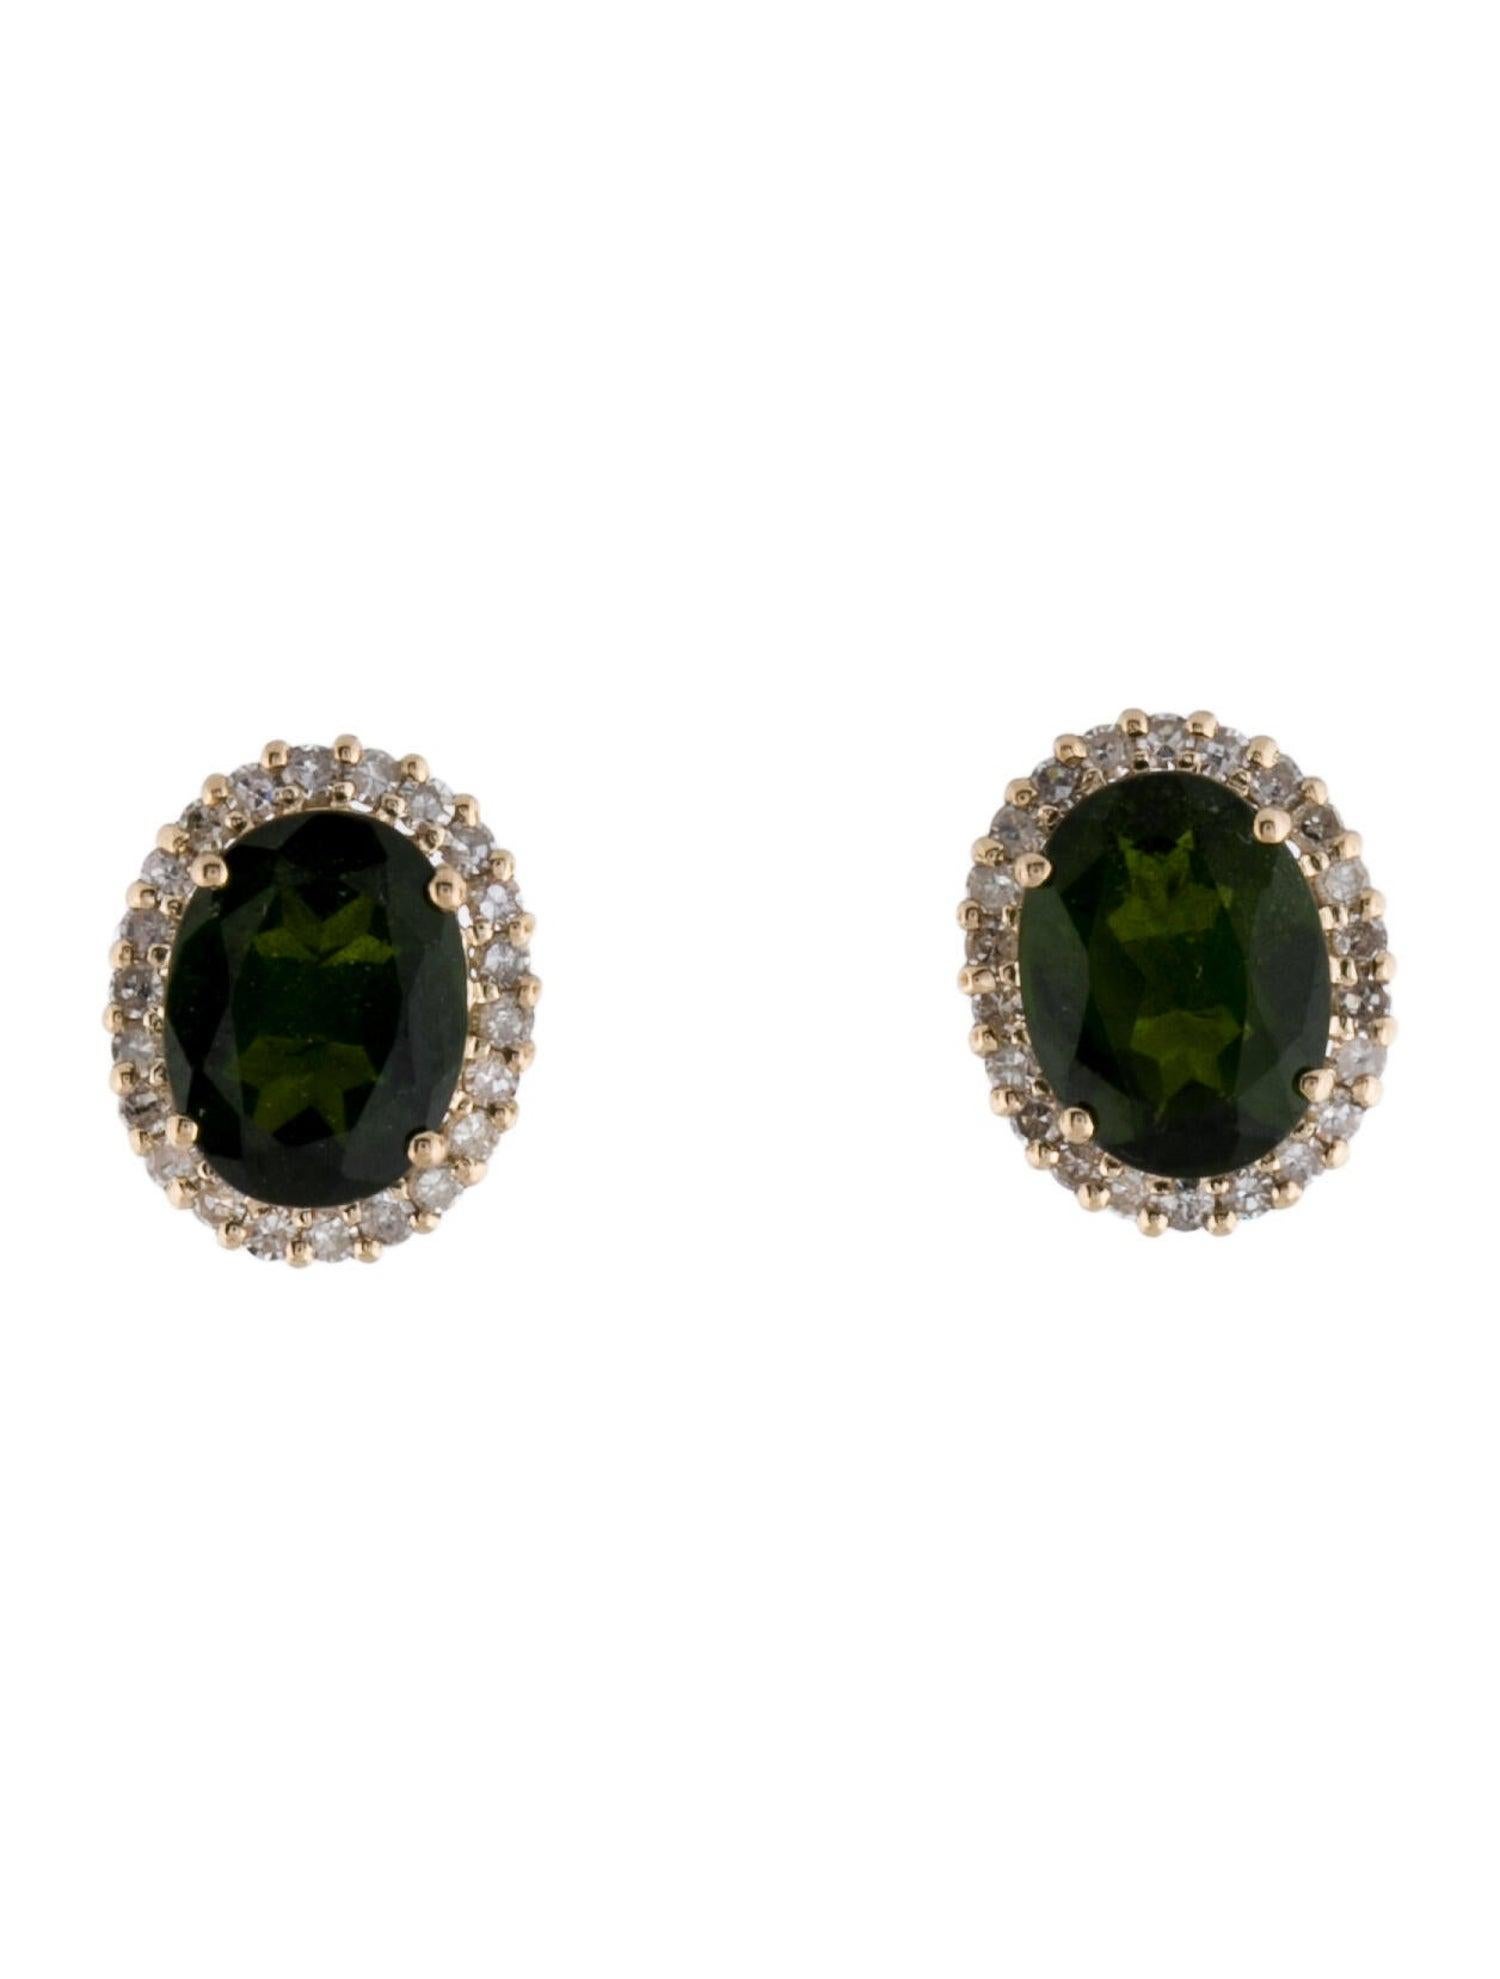 Elegant 14K Diopside & Diamond Stud Earrings - Gemstone Jewelry Collection In New Condition For Sale In Holtsville, NY